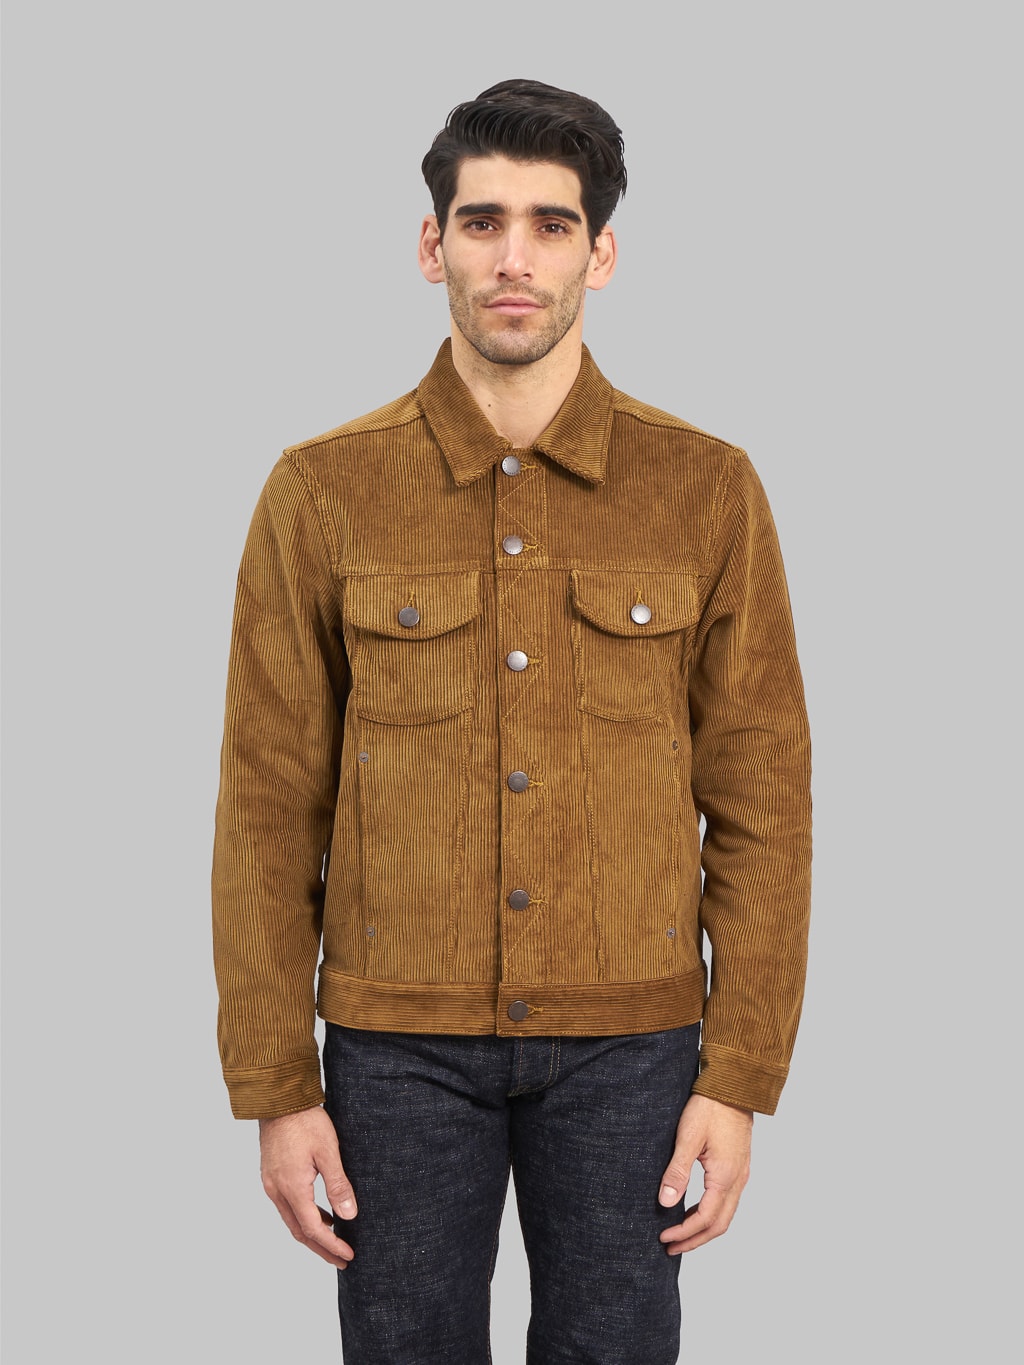 Freenote Cloth Classic Jacket Gold Corduroy model front fit